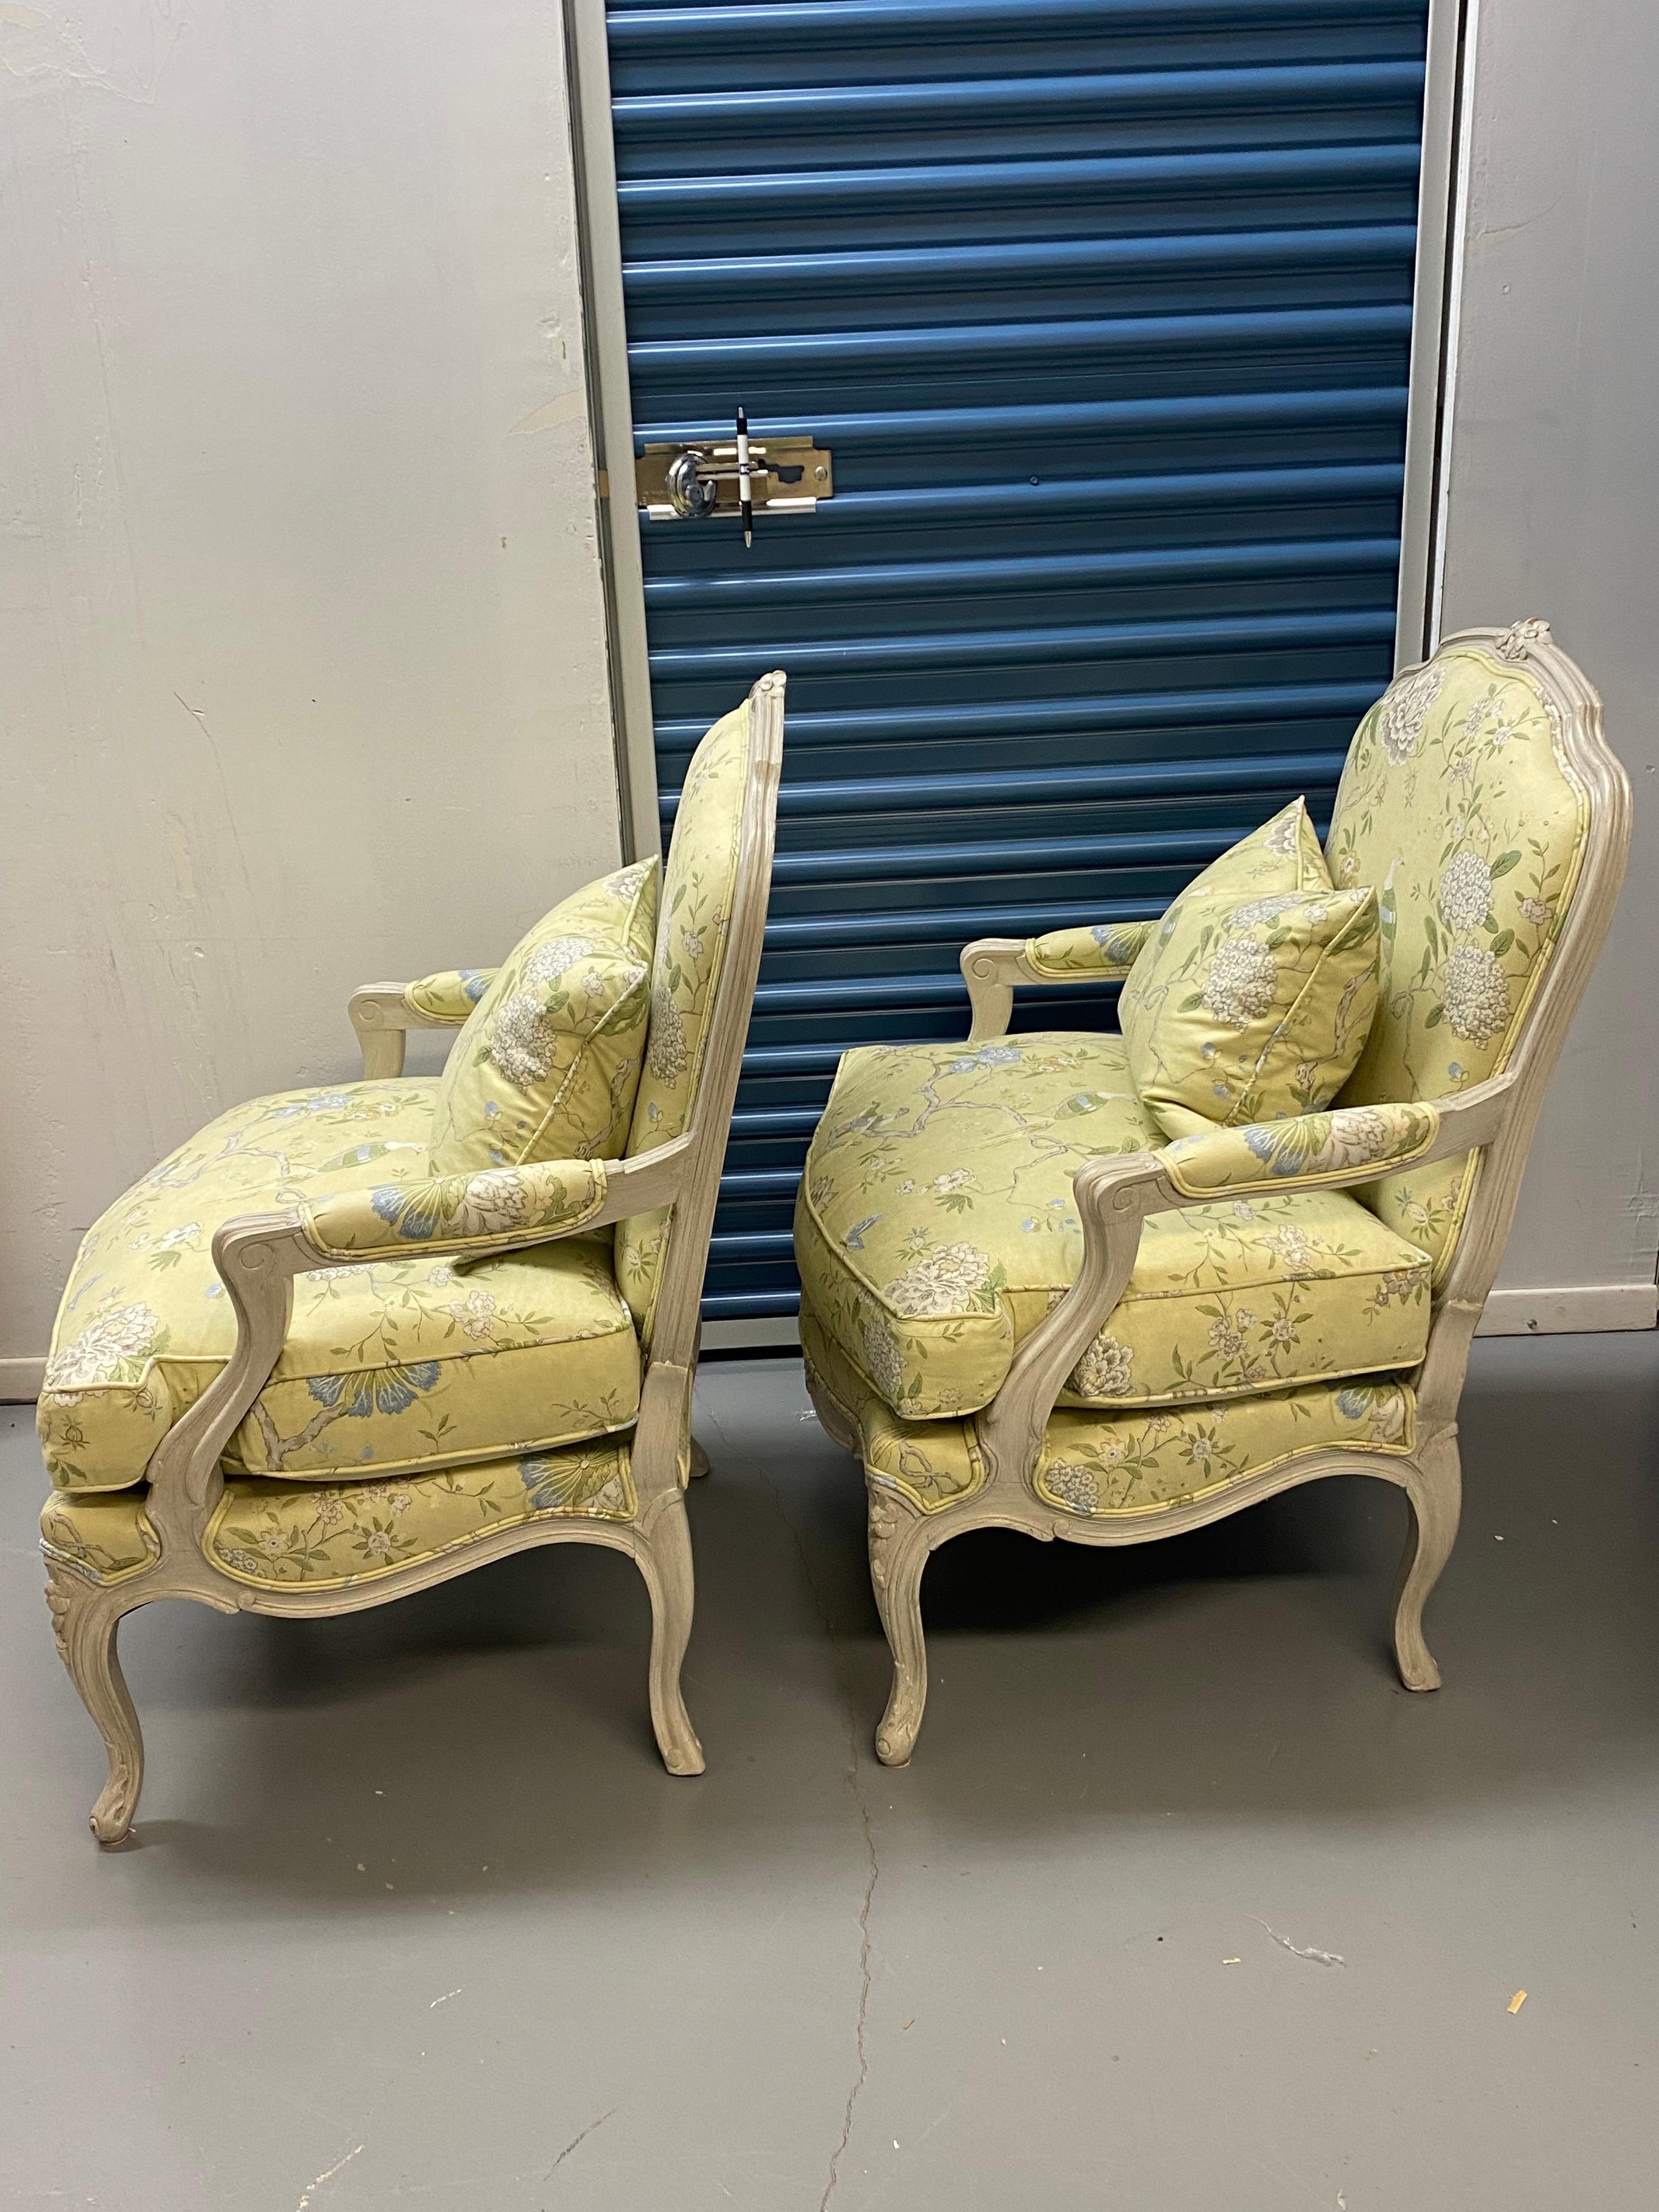 Pair of 20th Century Louis XV Style Upholstered Armchairs
A pair of French Louis XV style grey-white painted wood frame armchairs upholstered in a bright green-yellow cotton chinoiserie fabric. 
Some light wear on finish on legs. Upholstery in good